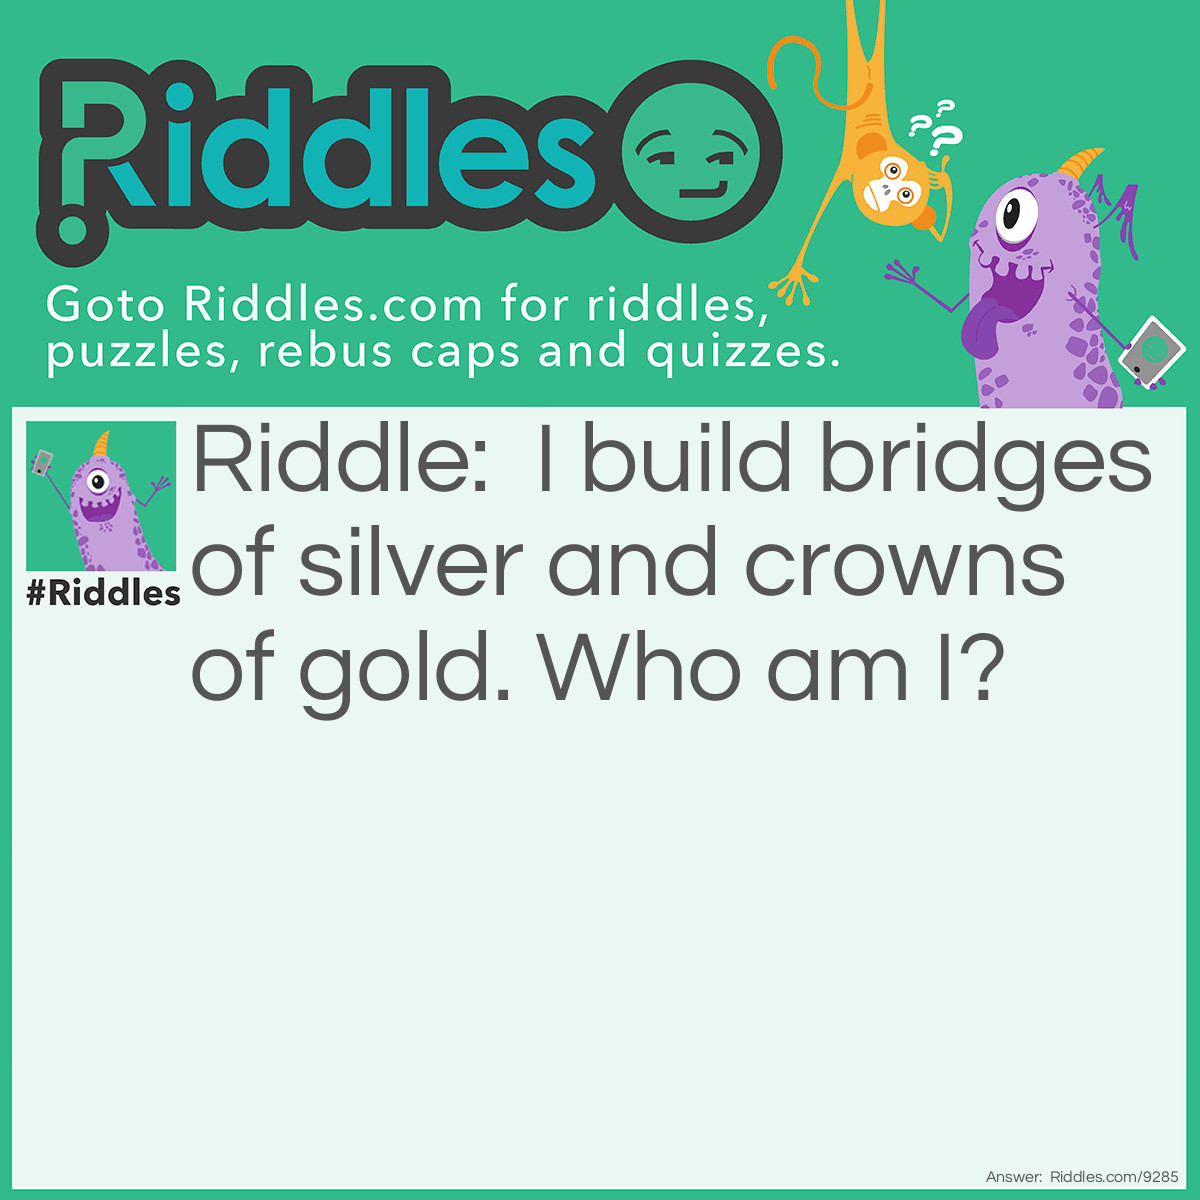 Riddle: I build bridges of silver and crowns of gold. Who am I? Answer: A Dentist.